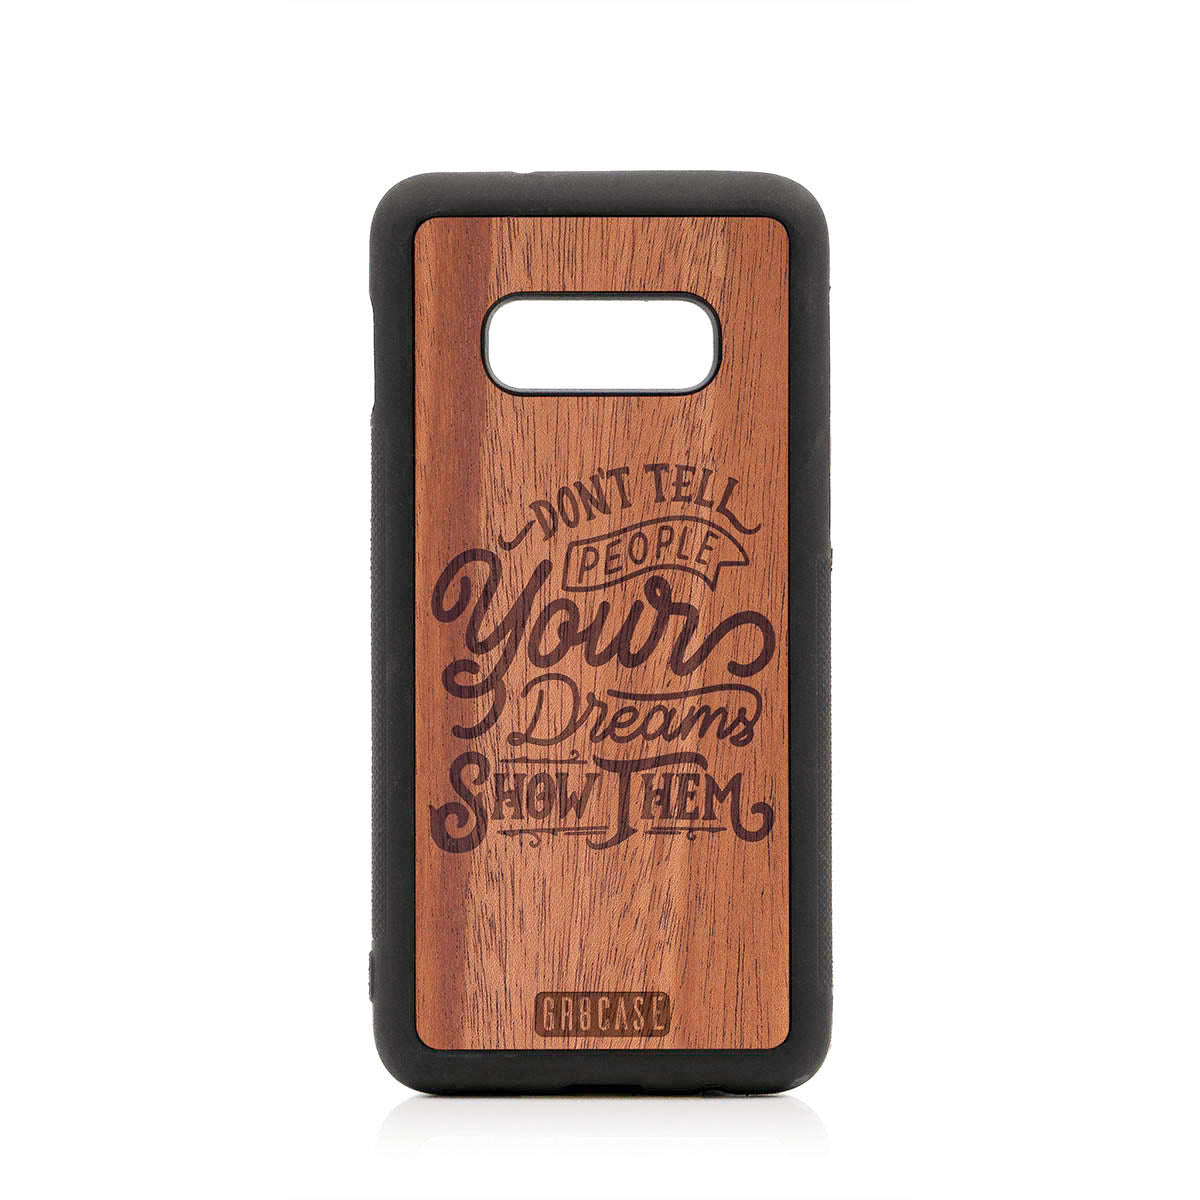 Don't Tell People Your Dreams Show Them Design Wood Case For Samsung Galaxy S10 by GR8CASE